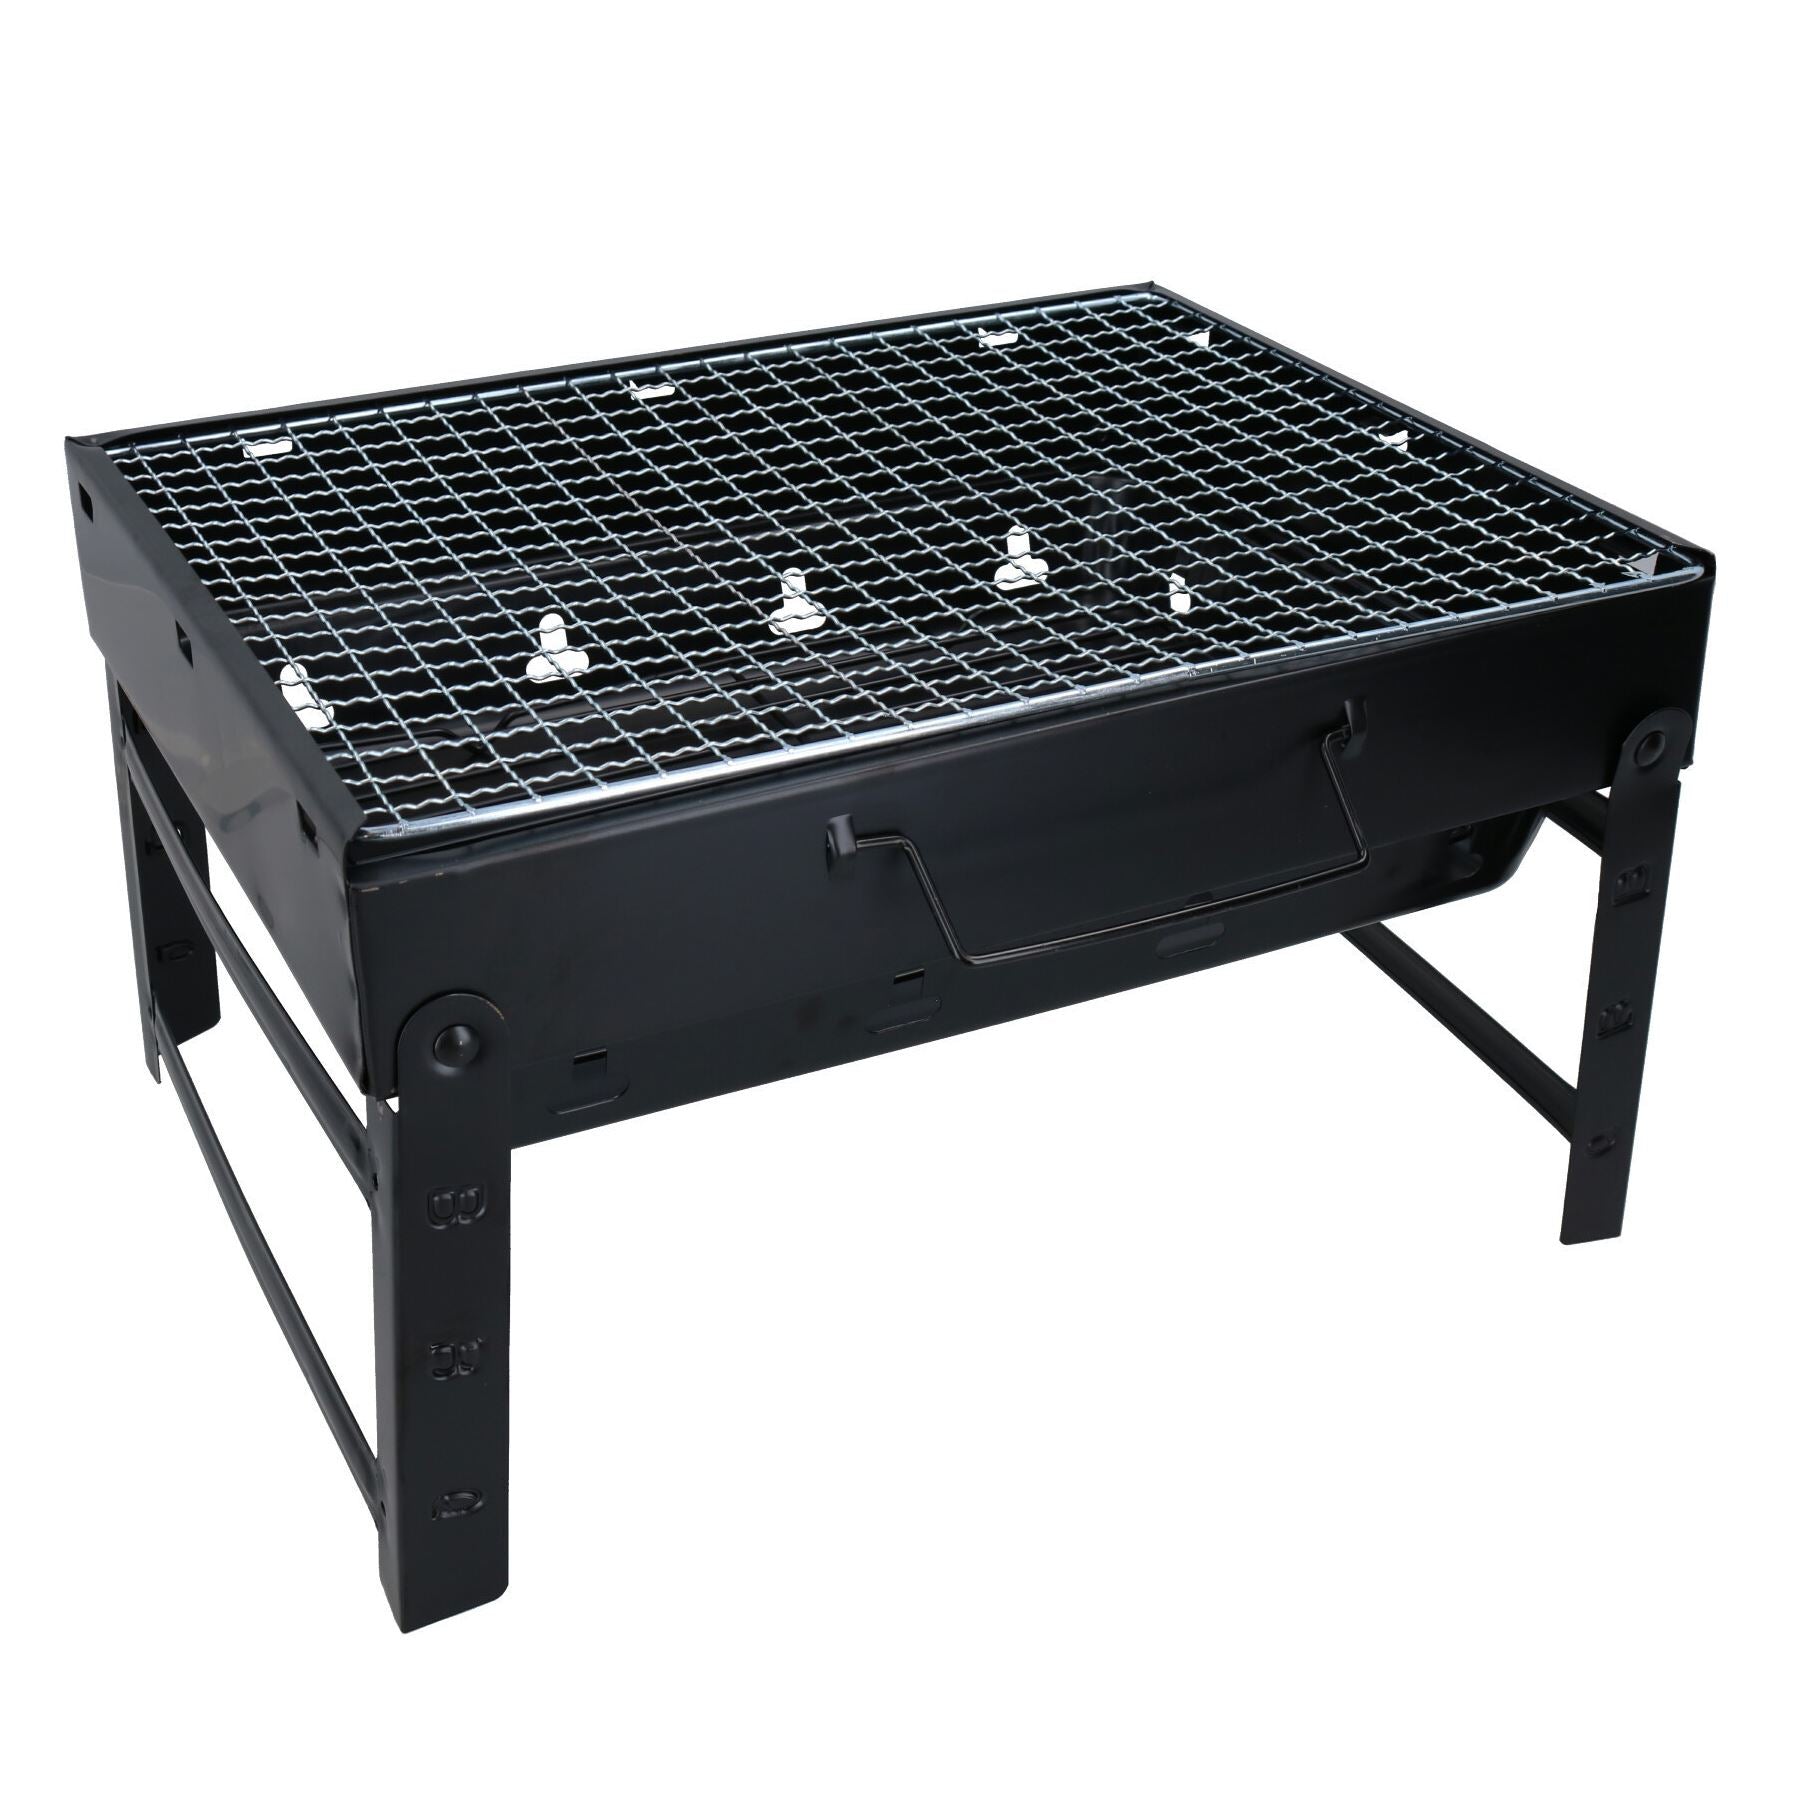 Portable Folding Charcoal BBQ Barbecue Grill For Picnics Camping Beach Smoker